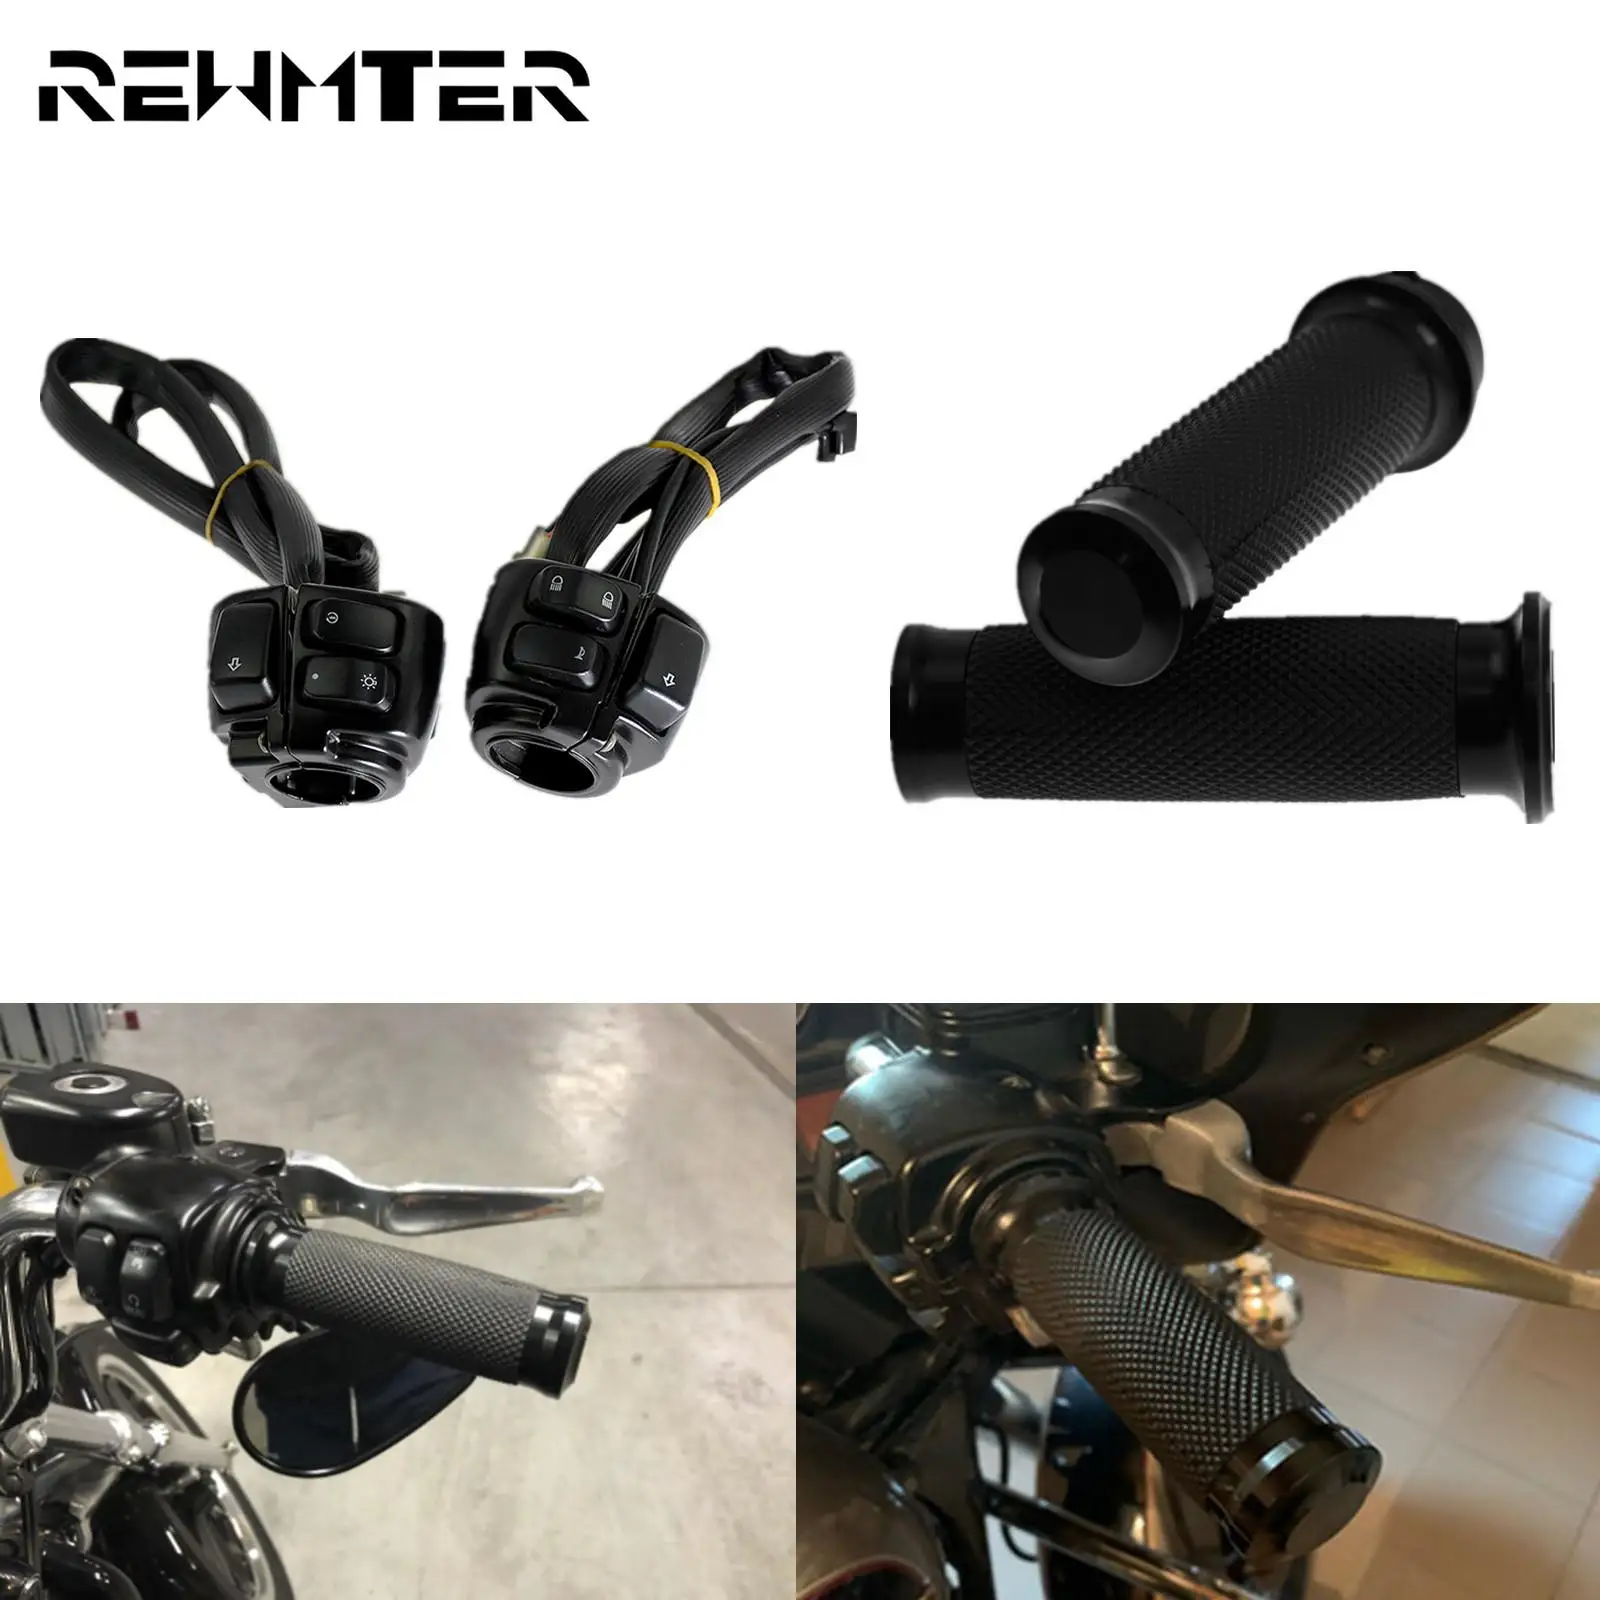 

Motorcycle 1" Handlebar Control Switch With Wiring Harness+25mm Hand Grips Black For Harley Sportster XL Dyna Touring Road King